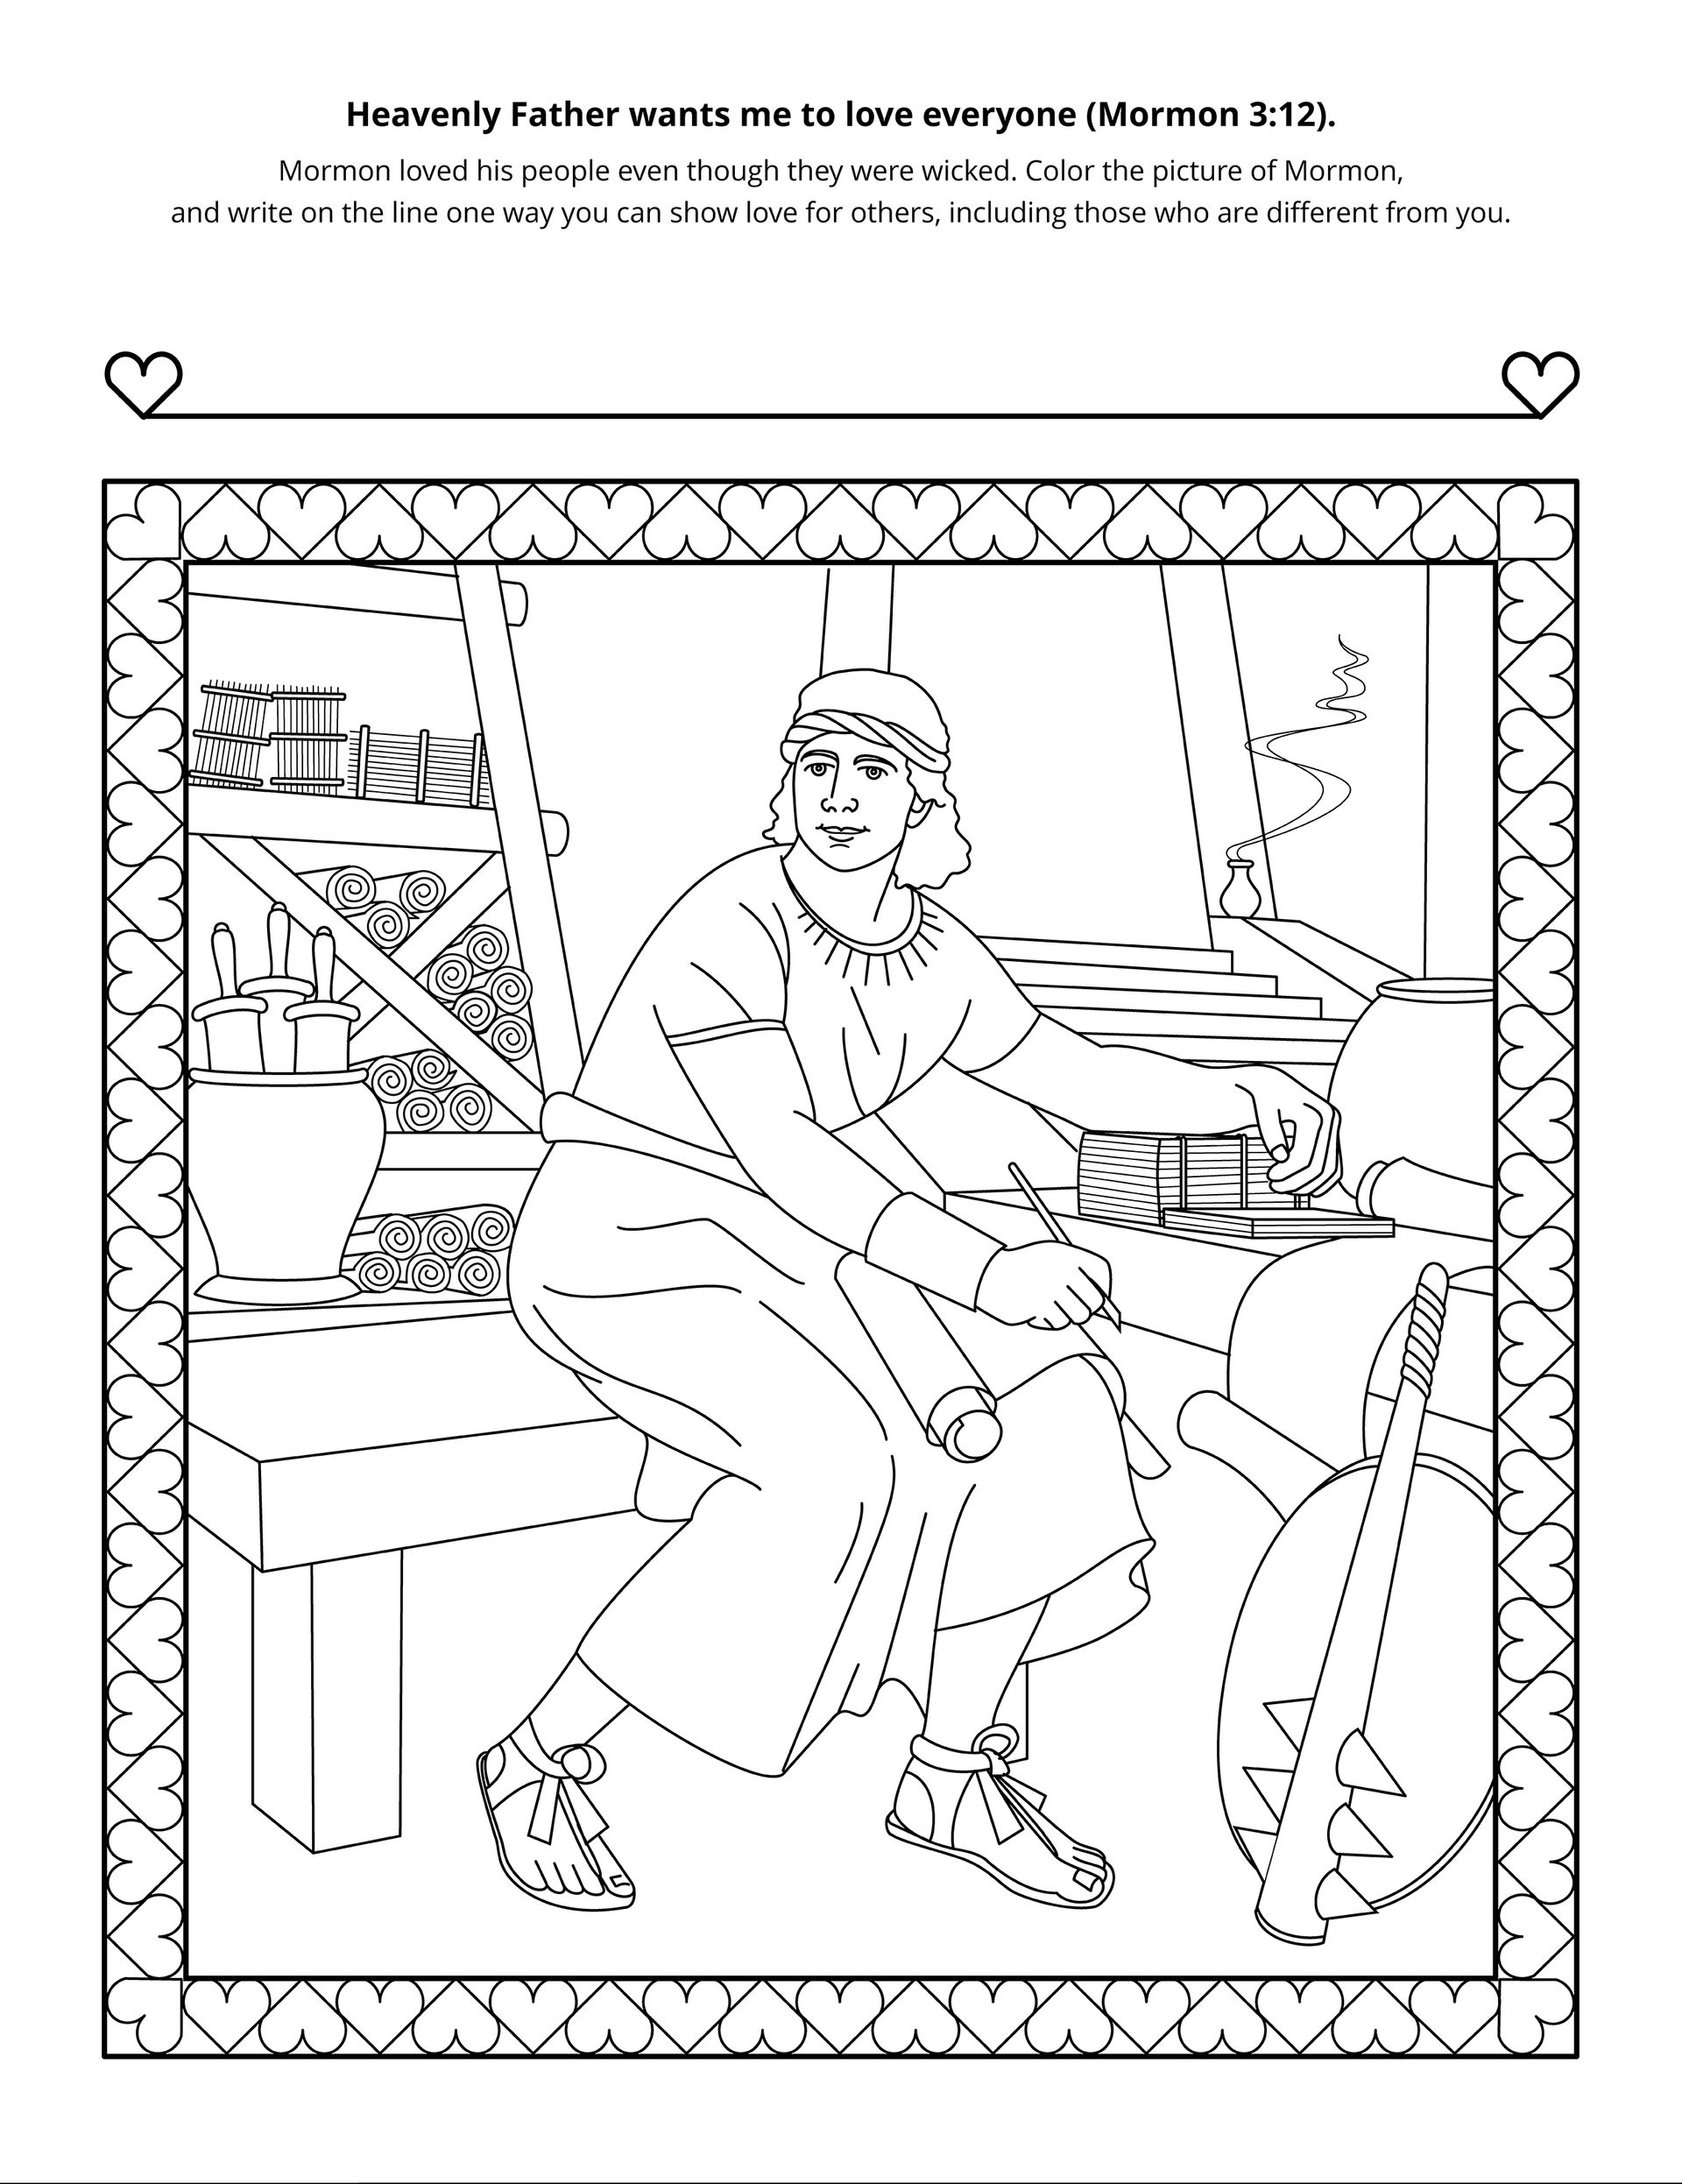 A line-art drawing of Mormon.